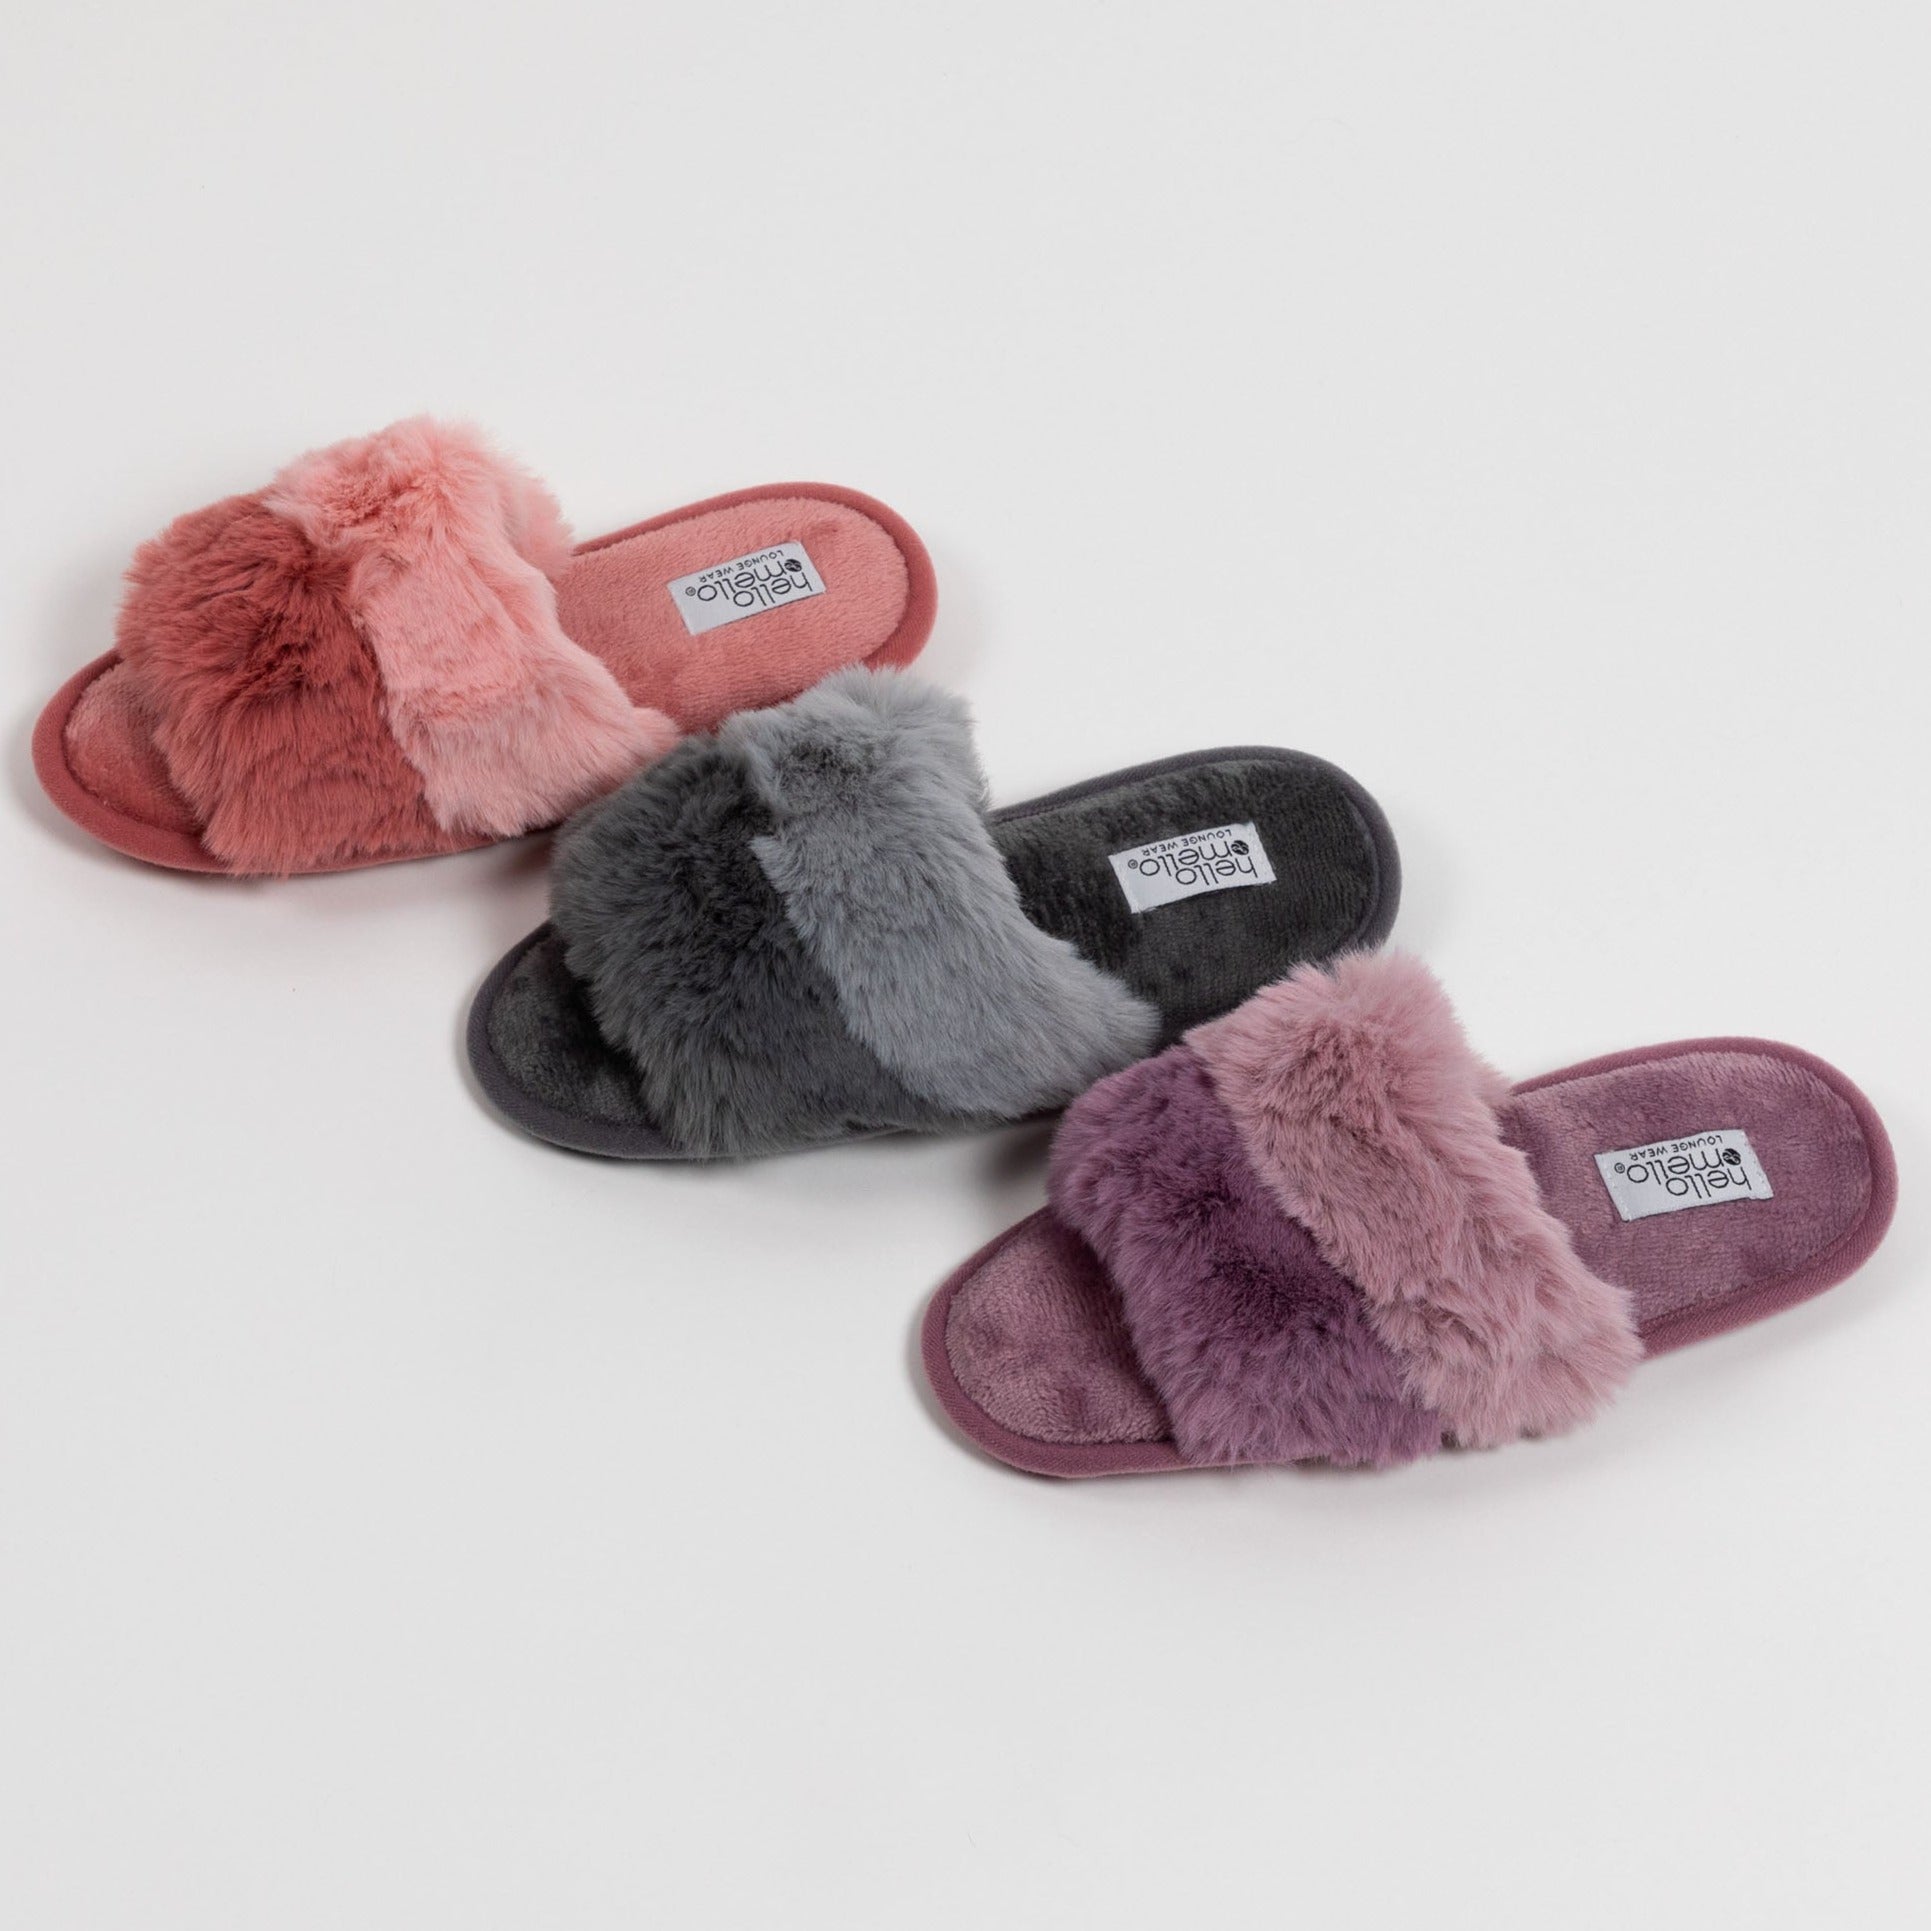 Cotton Candy Puff Slide Slippers - Grape - S/M